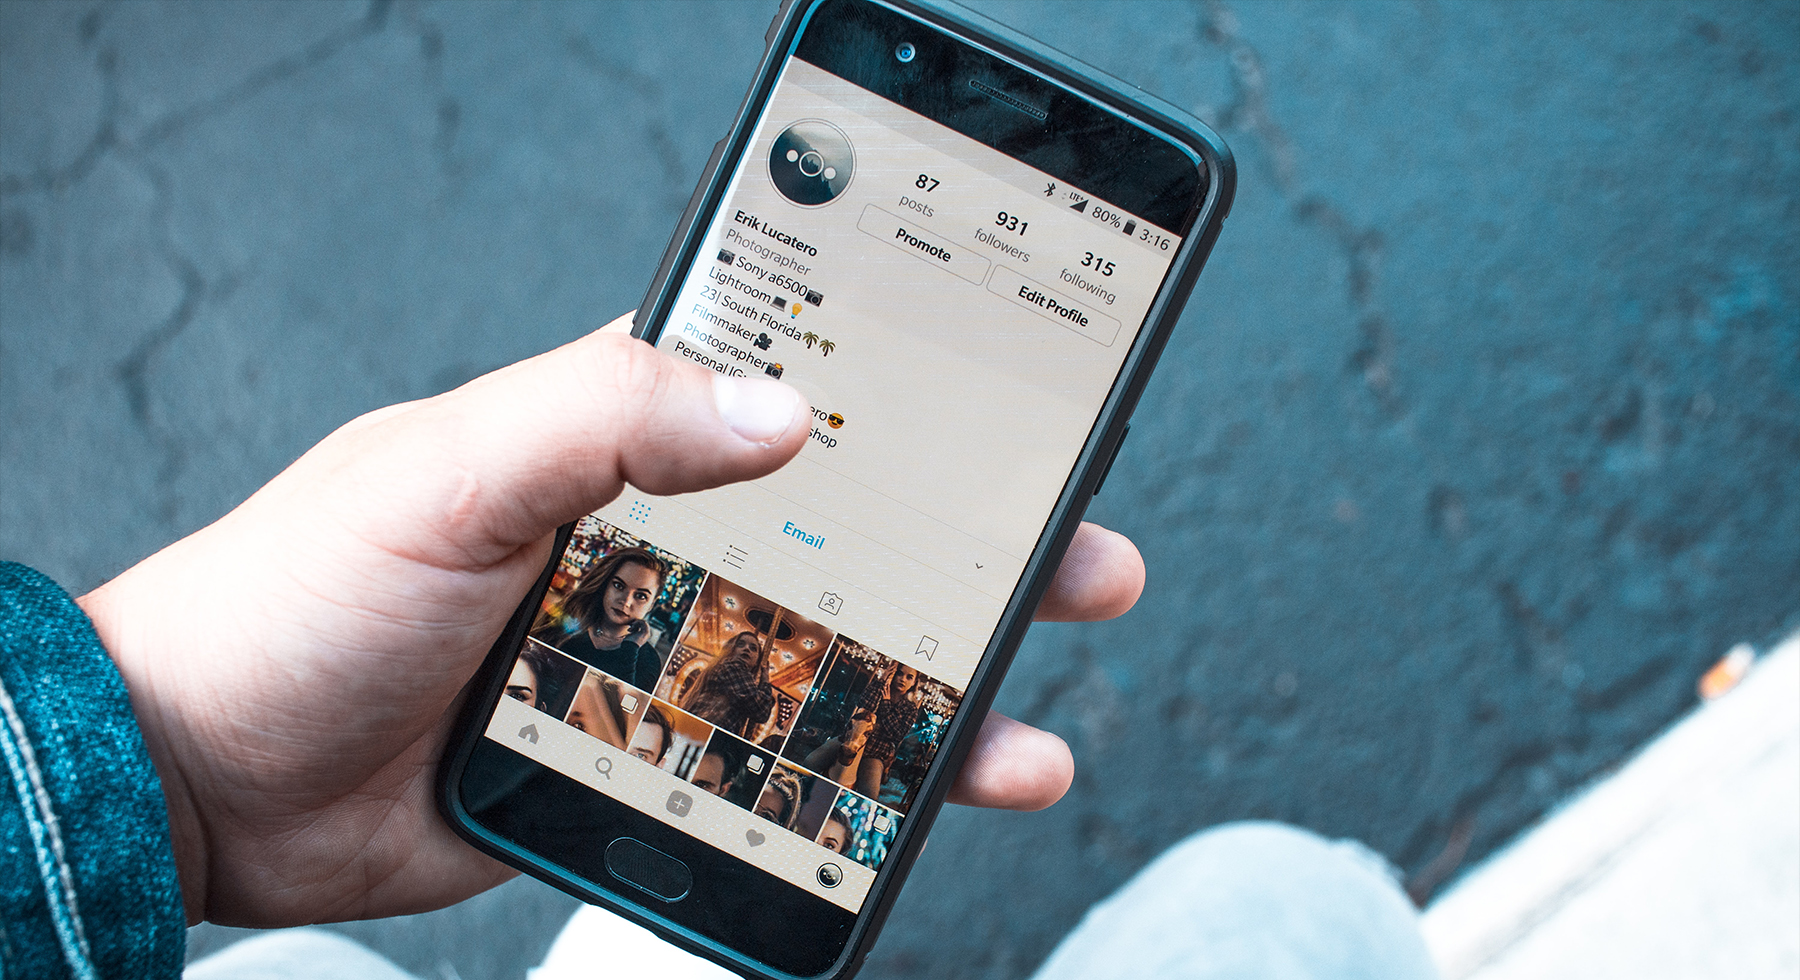 Anonymously View Instagram Stories with Your Android Phone